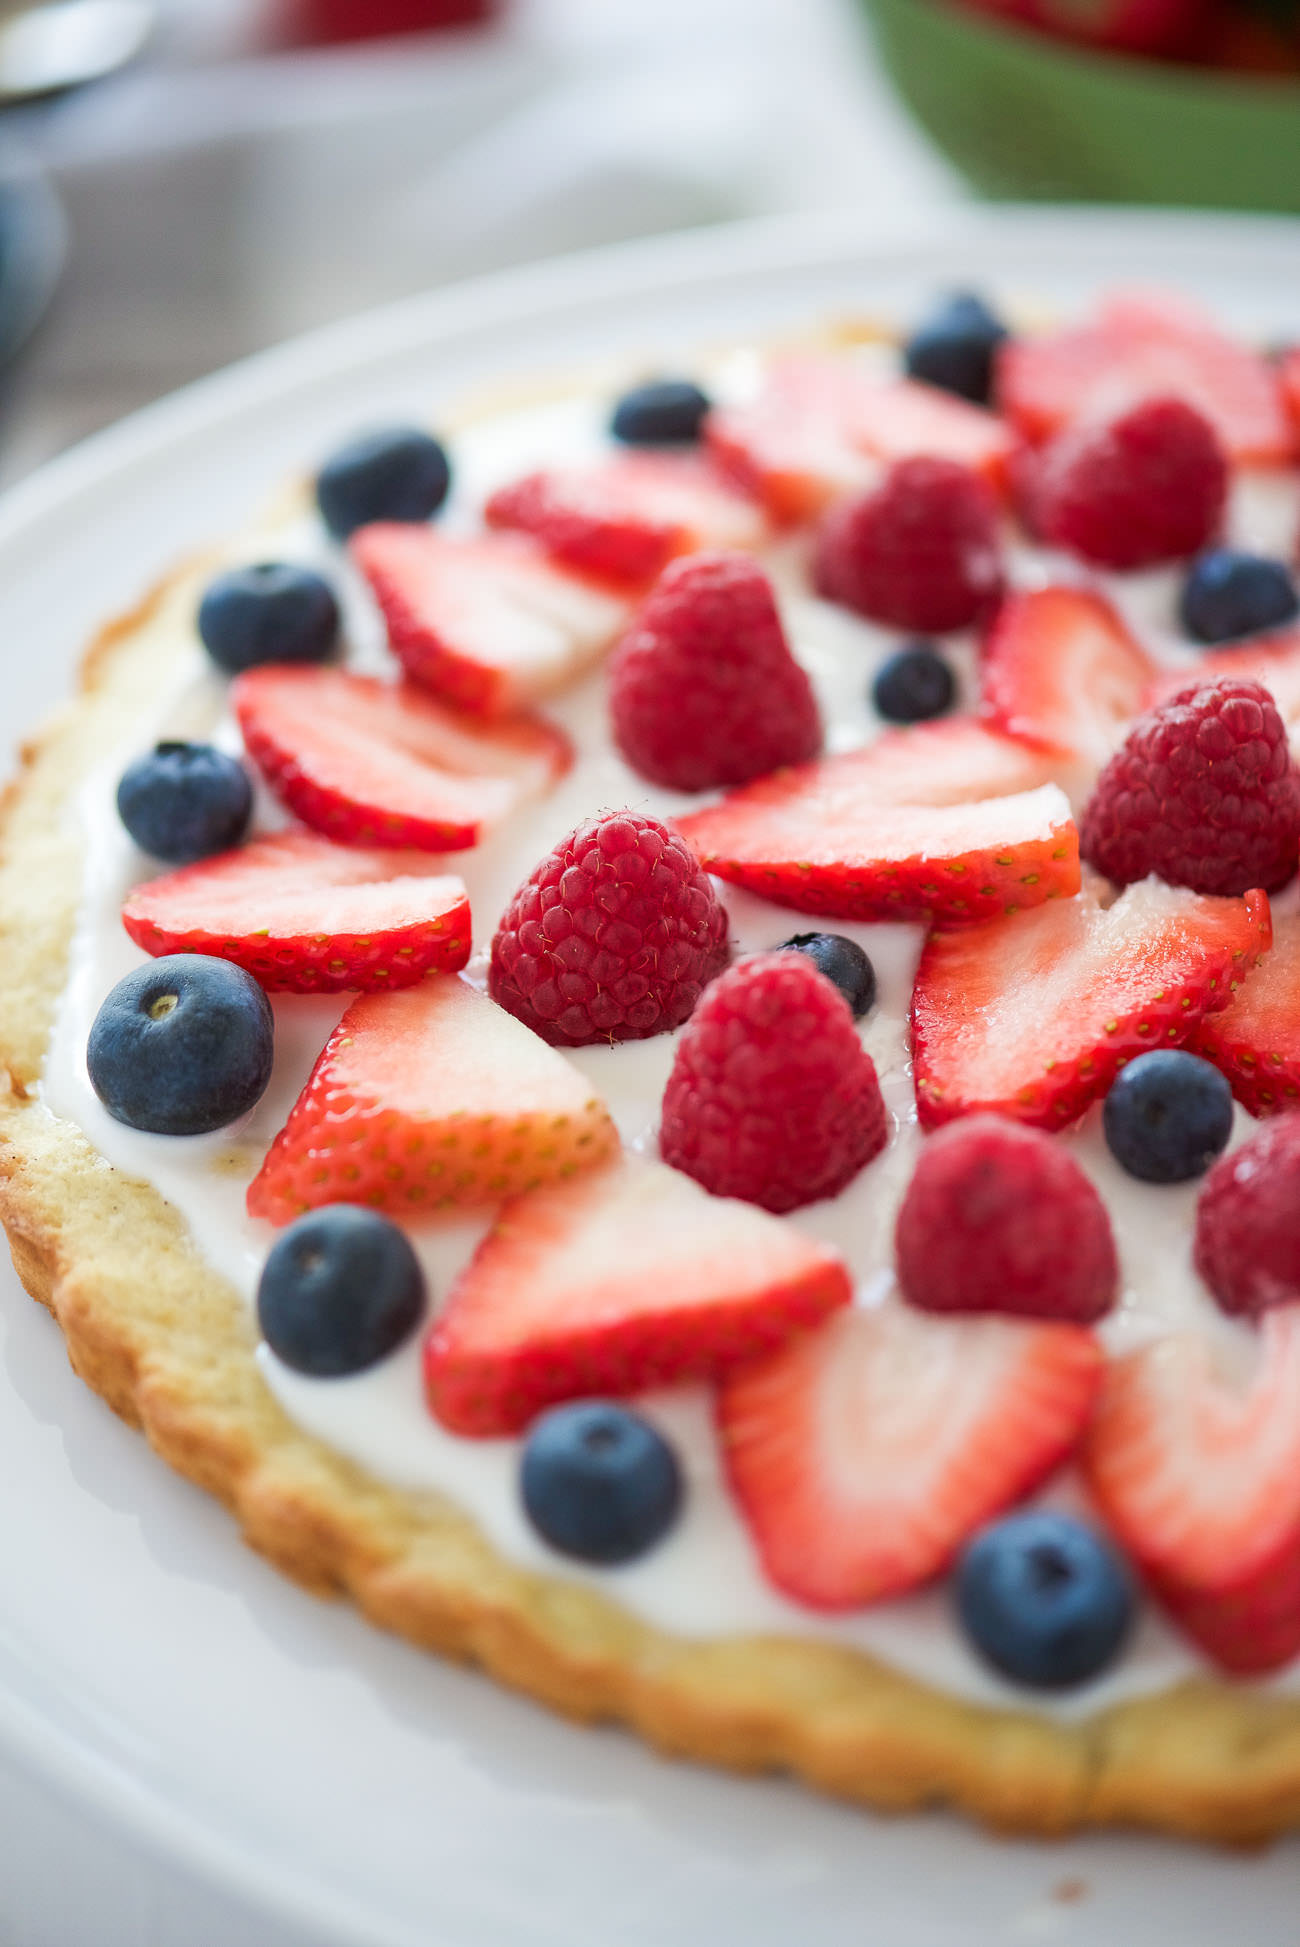 This Berry Tart with Lemon Cookie Crust has made all my spring dessert dreams come true! A citrus cookie crust topped with vanilla greek yogurt and fresh berries! The ideal and simple dessert to impress any guest!